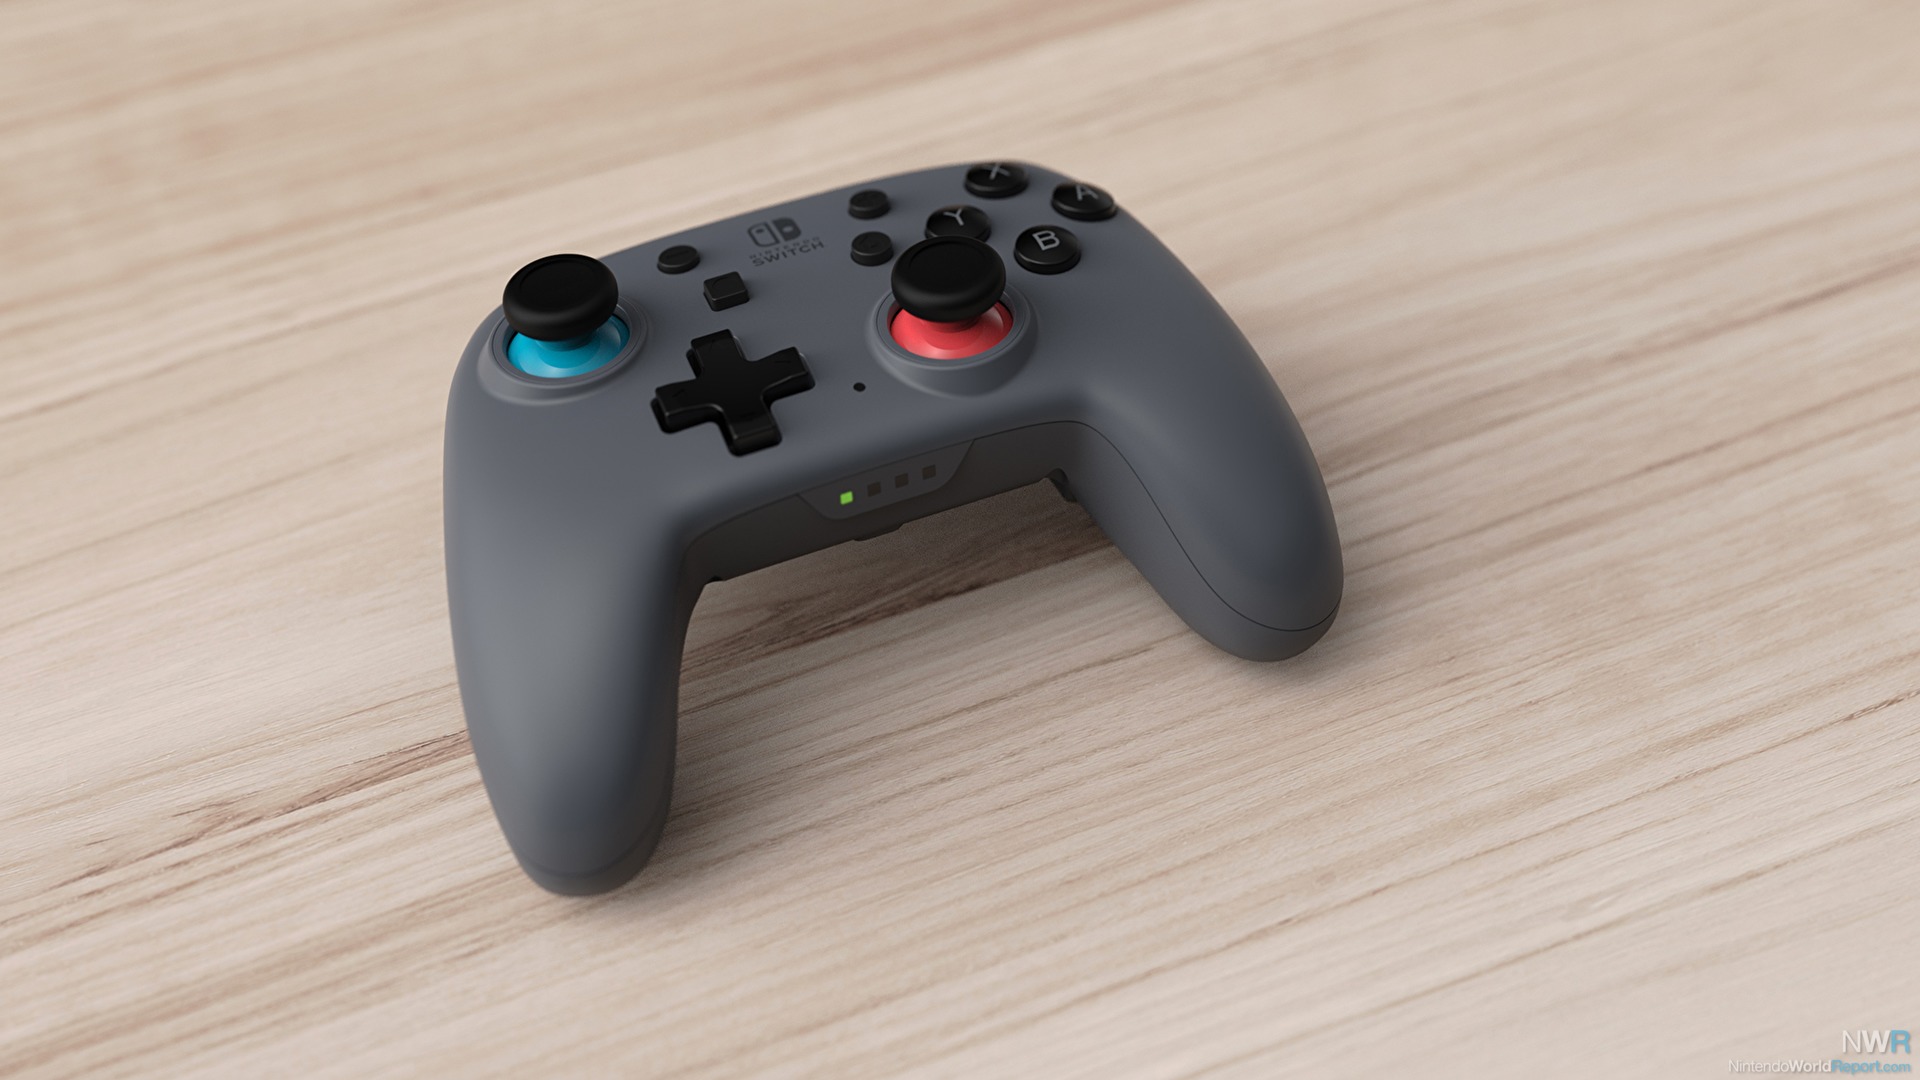 selvmord reb Anklage PowerA Launching Small Nintendo Switch Pro Controller in August - News -  Nintendo World Report